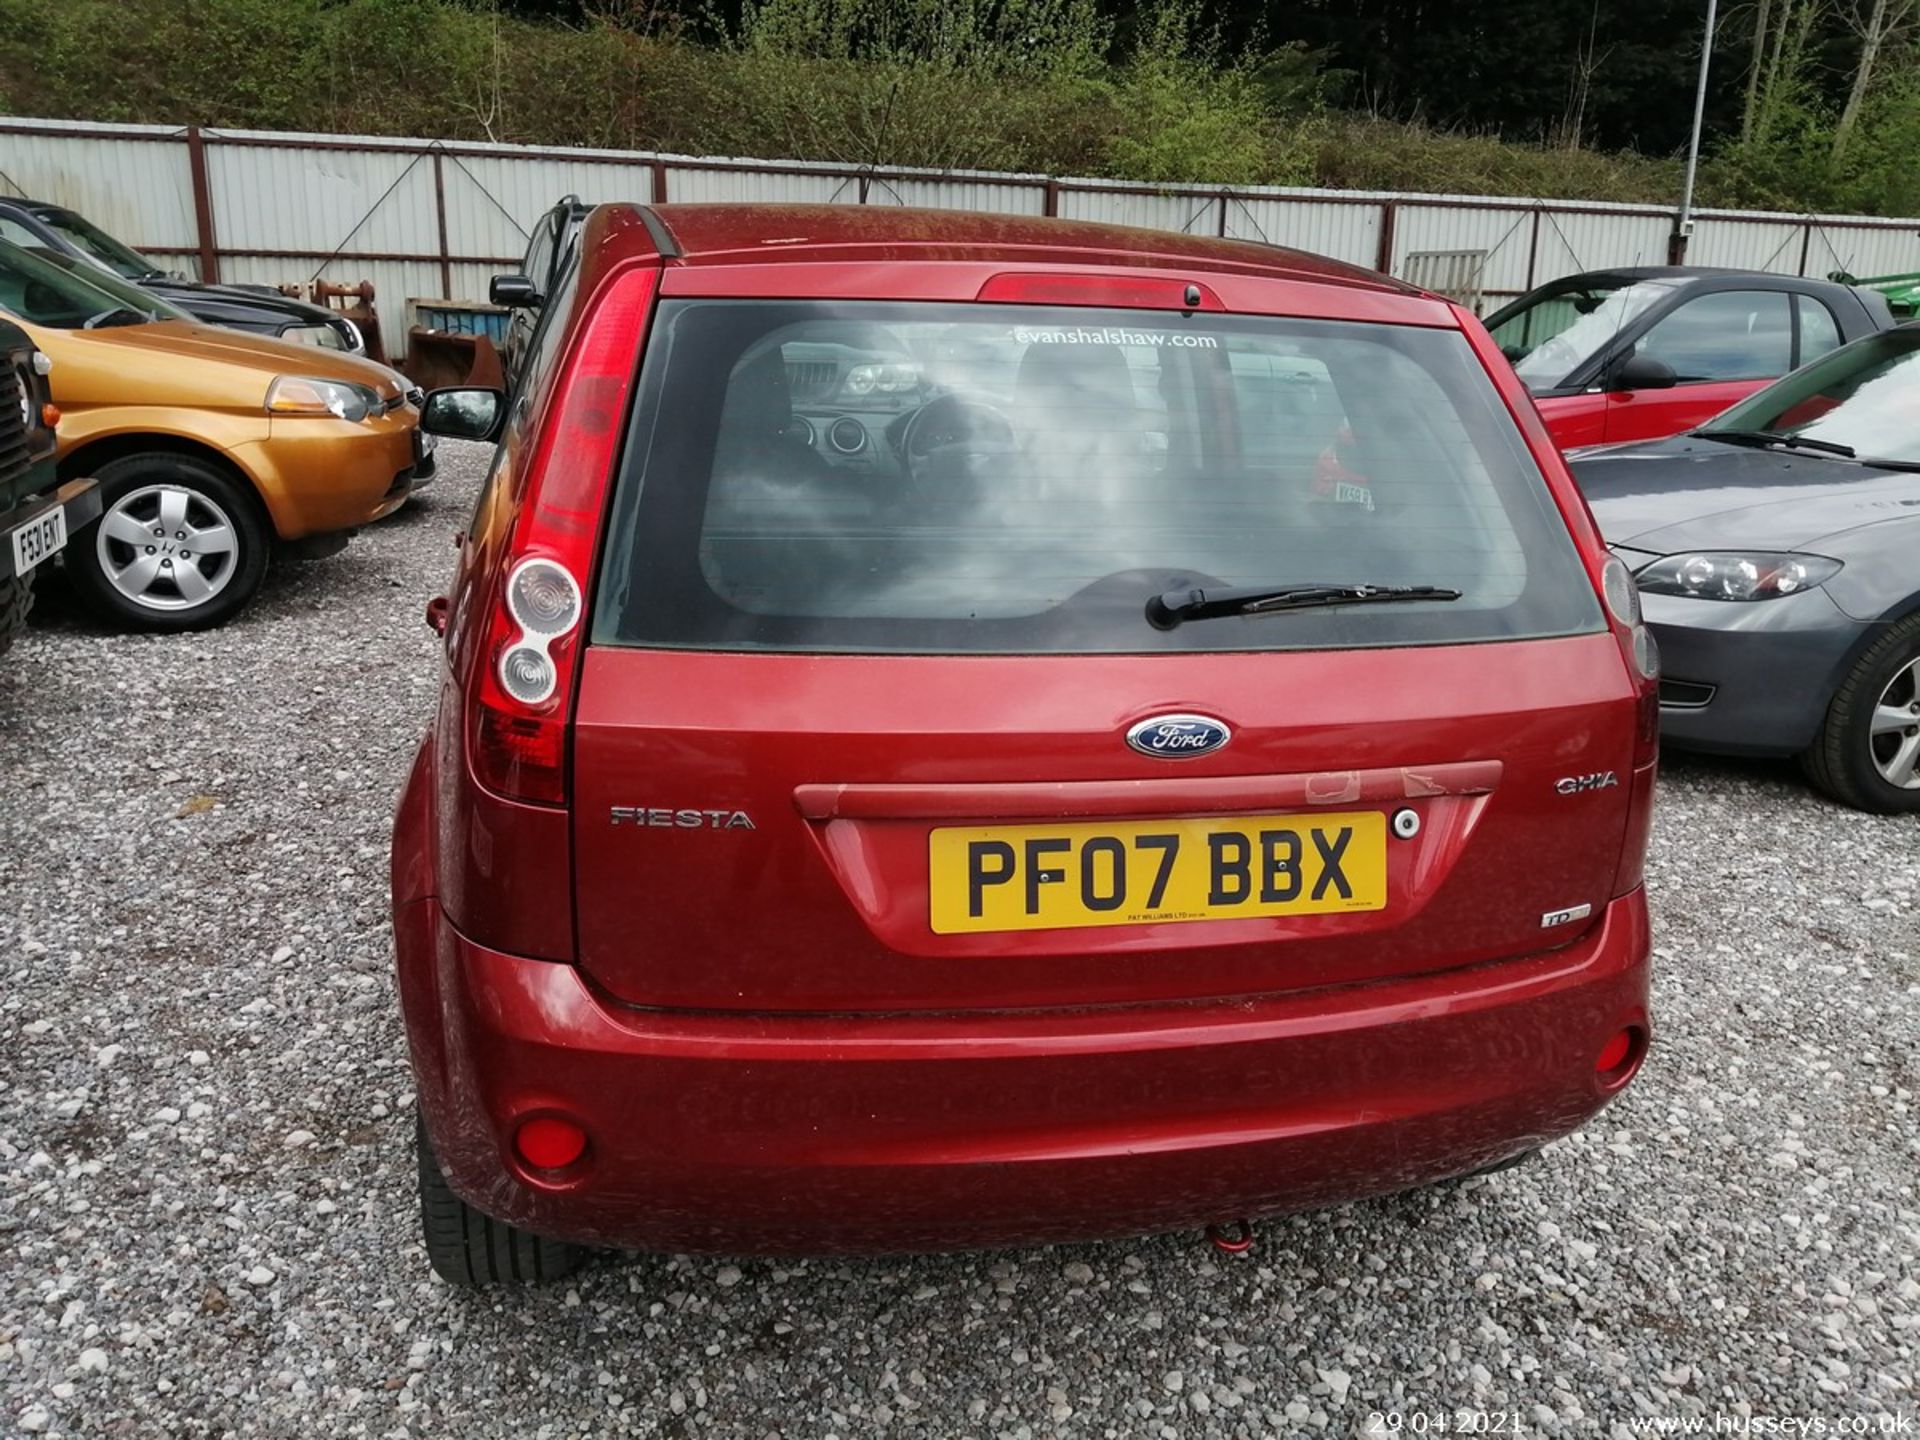 07/07 FORD FIESTA GHIA TDCI - 1399cc 5dr Hatchback (Red, 111k) - Image 5 of 11